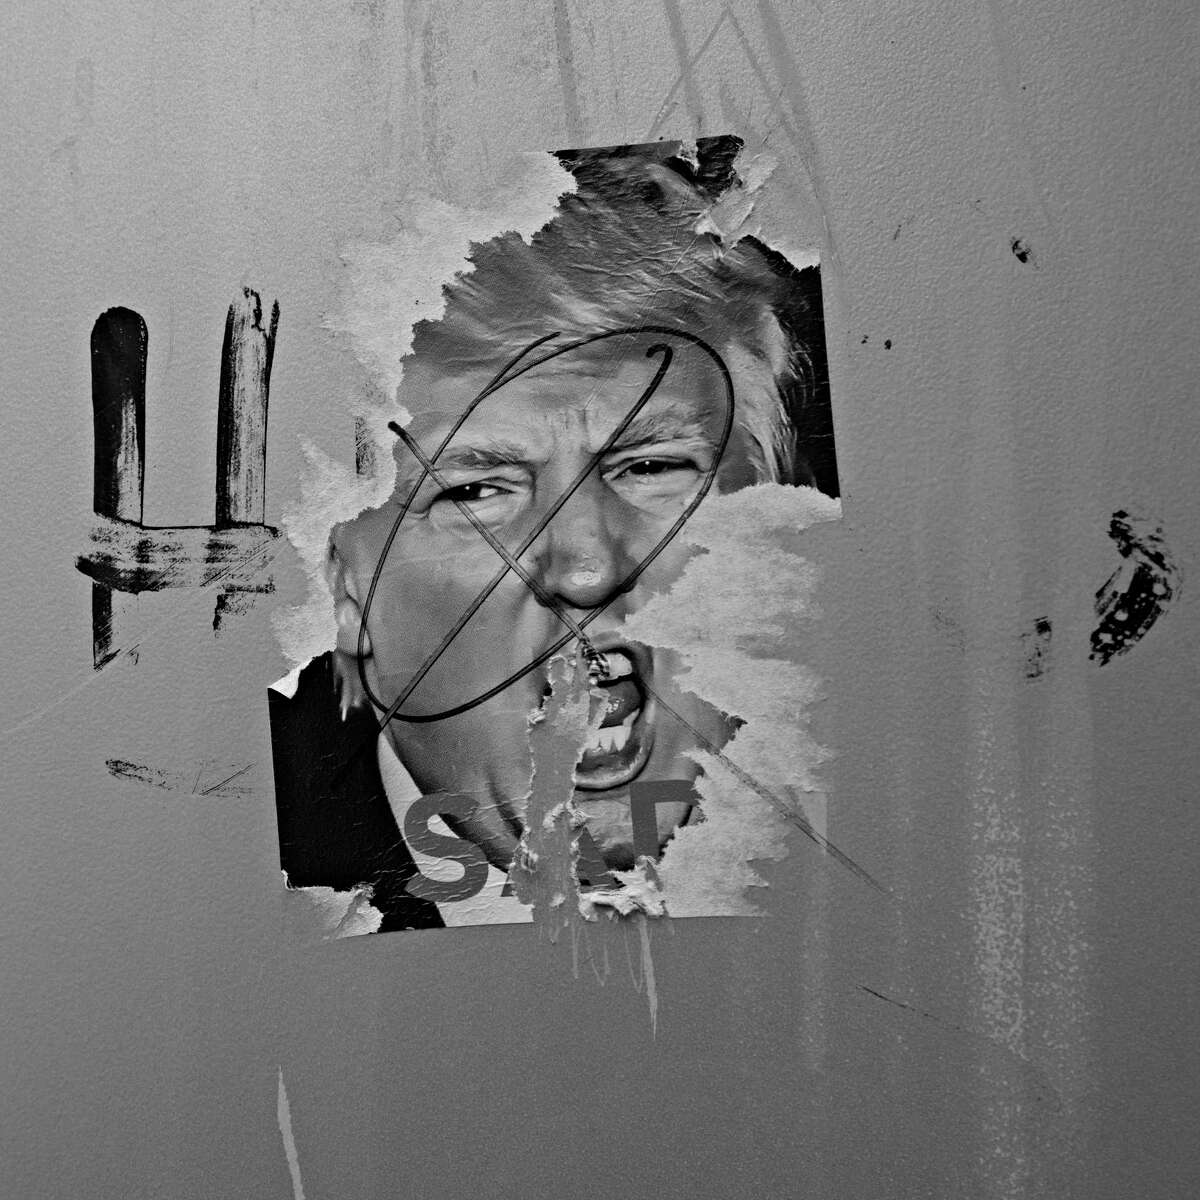 WASHINGTON, DC | January 8, 2021 A defaced sticker of President Donald Trump is seen on 15th ST NW near the White House. Two days after a mob of Trump supporters stormed the U.S. Capitol, Washington, DC is a ghost town with fences and barricades now surrounding key buildings, and a handful of Army and Air National Guard as well as police officers from Maryland, Virginia and DC guarding the city.